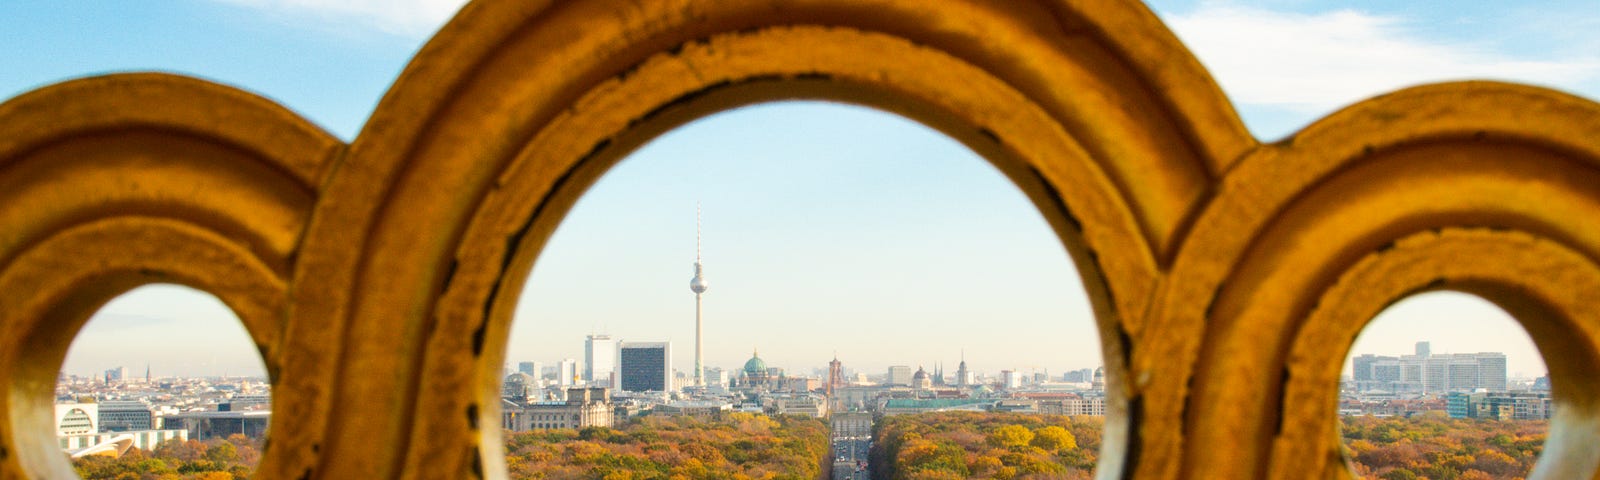 road leading to the city of Berlin Germany seen through a concrete filigreed railing.